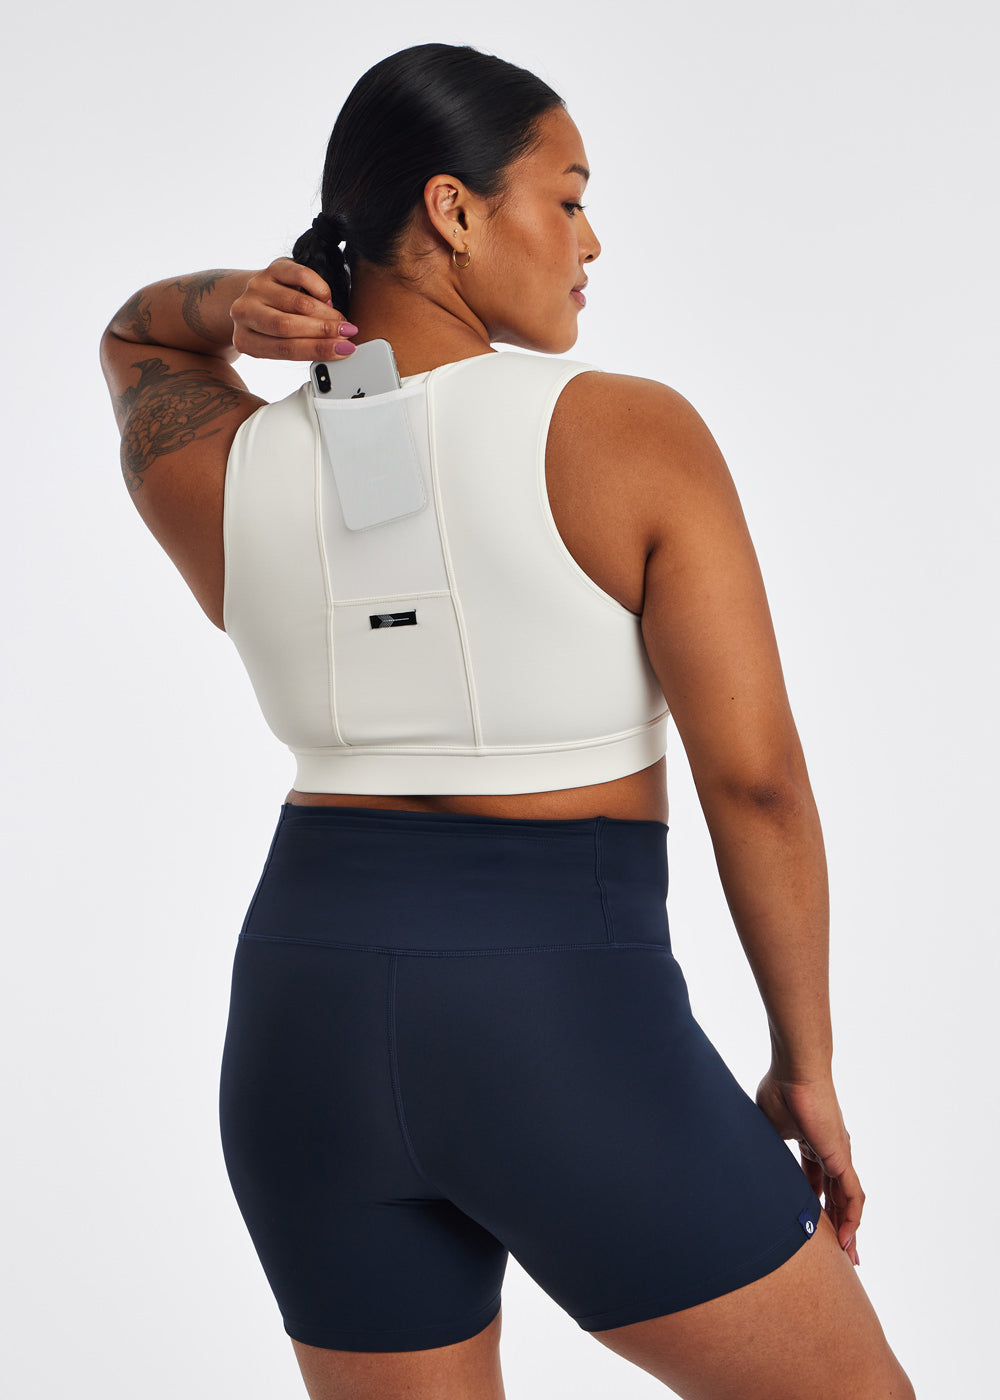 Plus Size Back Posture Corrector Bra for Women Comfort Fit Underwear Sports  Yoga Tank Top Bras Undershirt (Color : White, Size : S/Small)